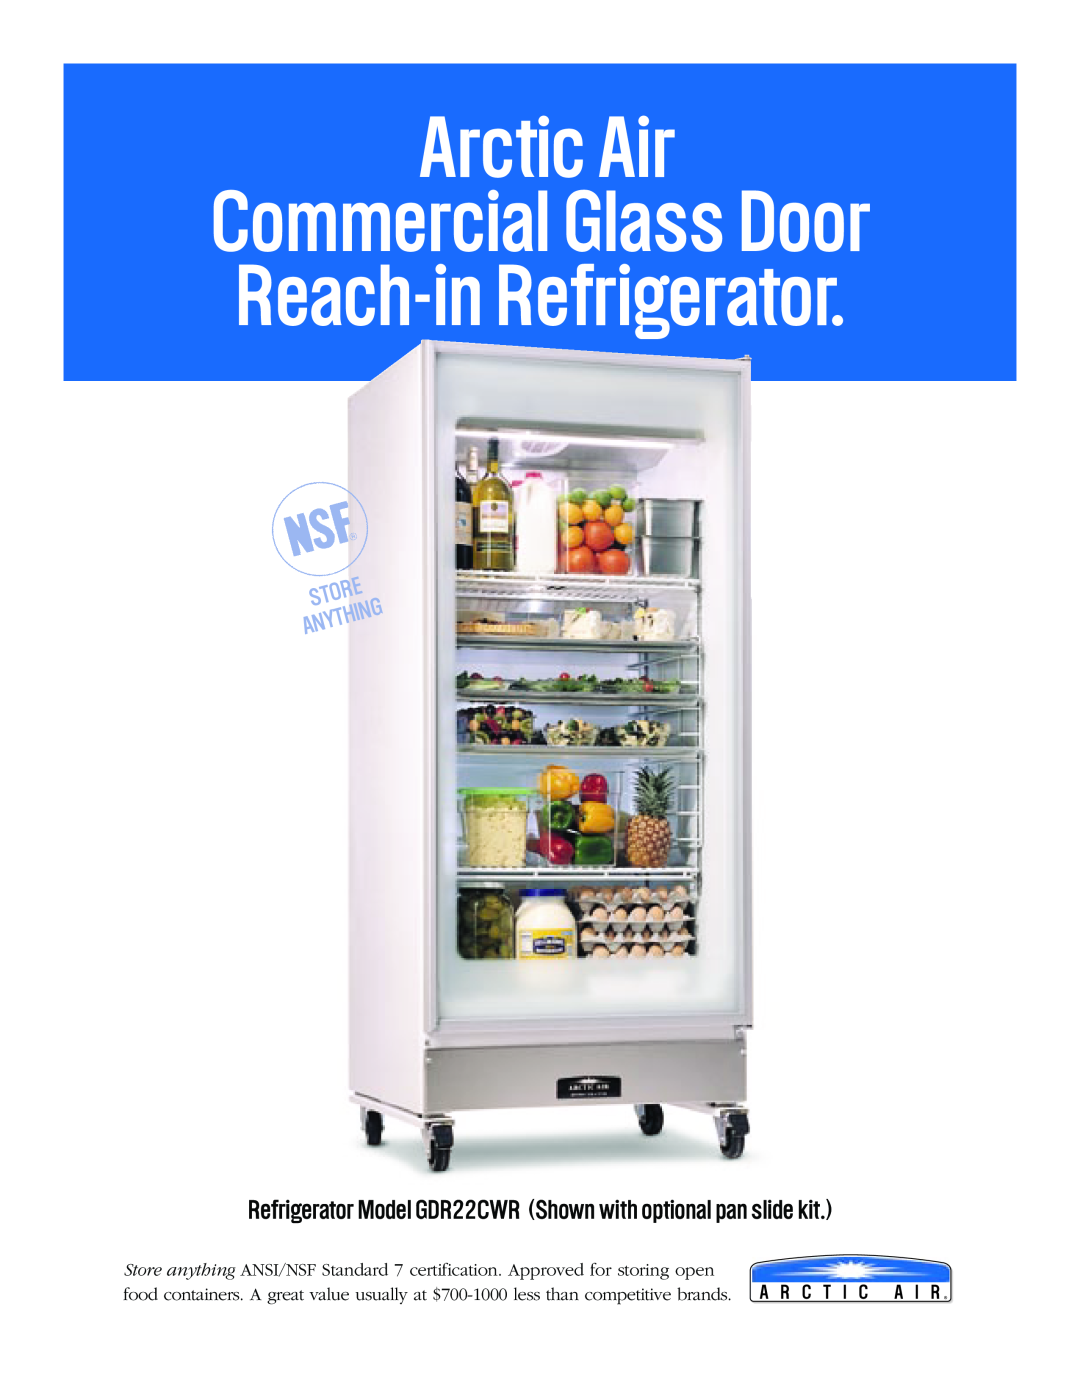 Arctic Air GDR22CWR manual Arctic Air Commercial Glass Door, Reach-inRefrigerator, Store Anything 